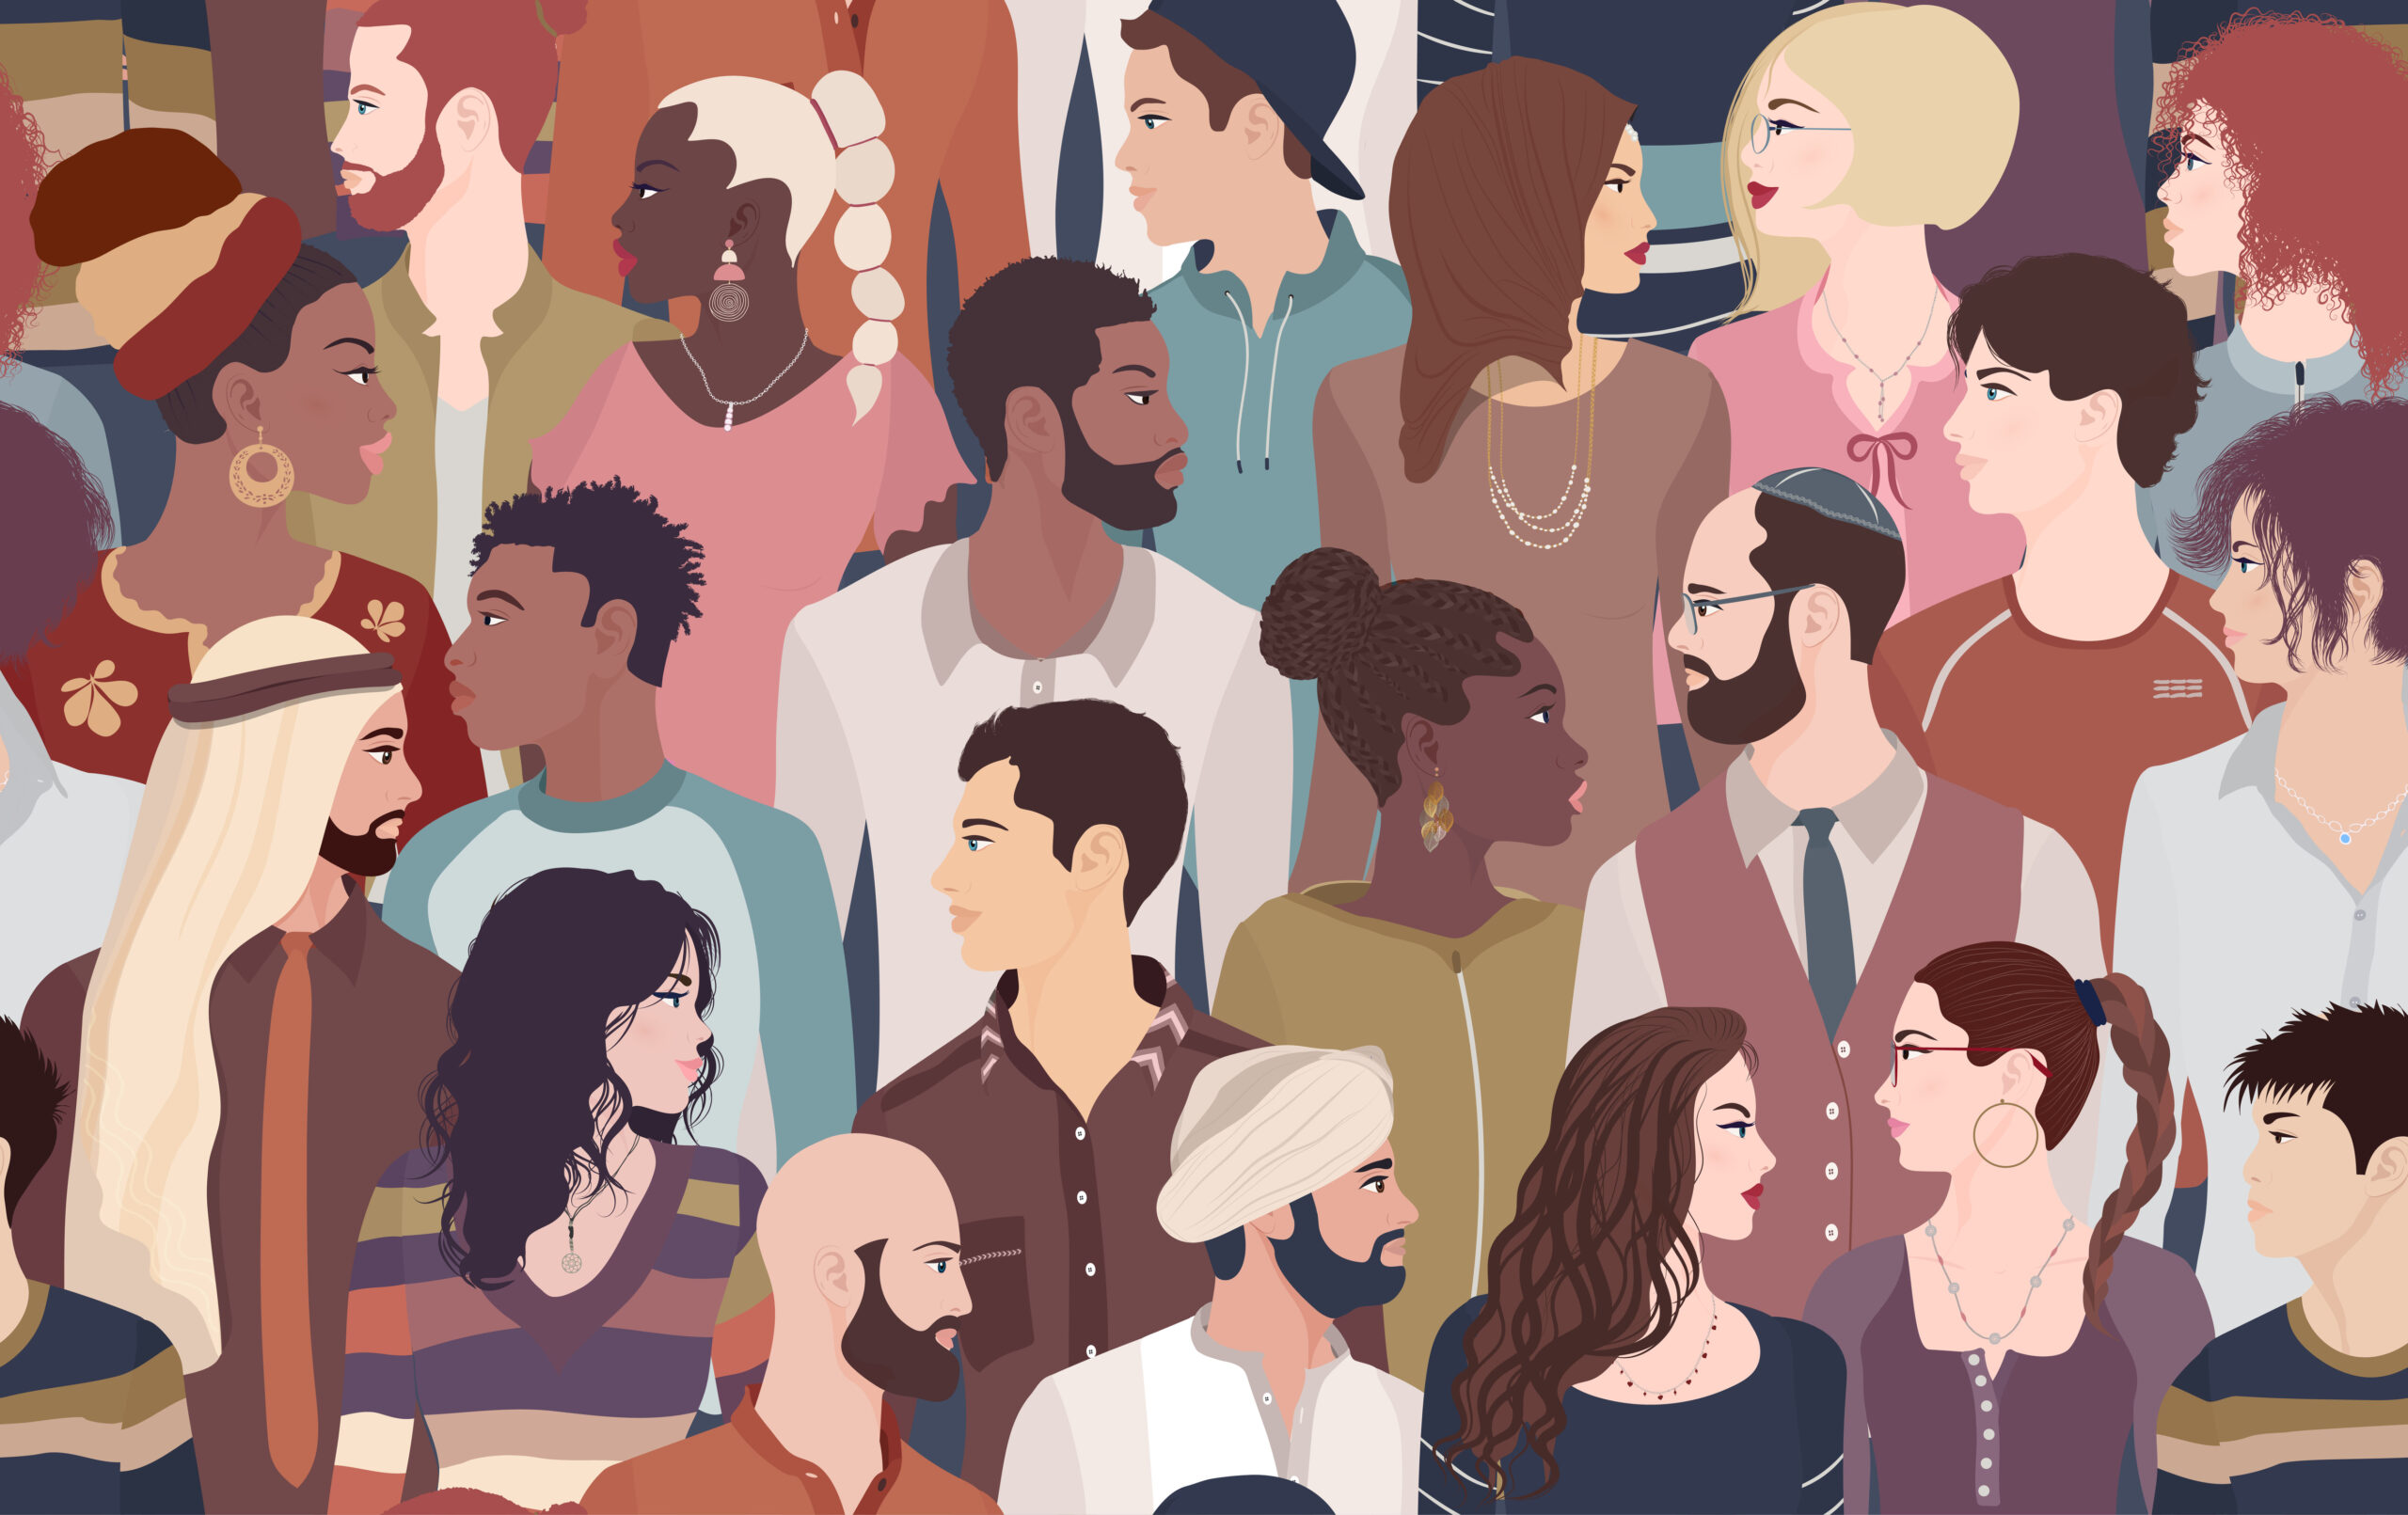 Group of men and women profile of diverse culture. Illustration.